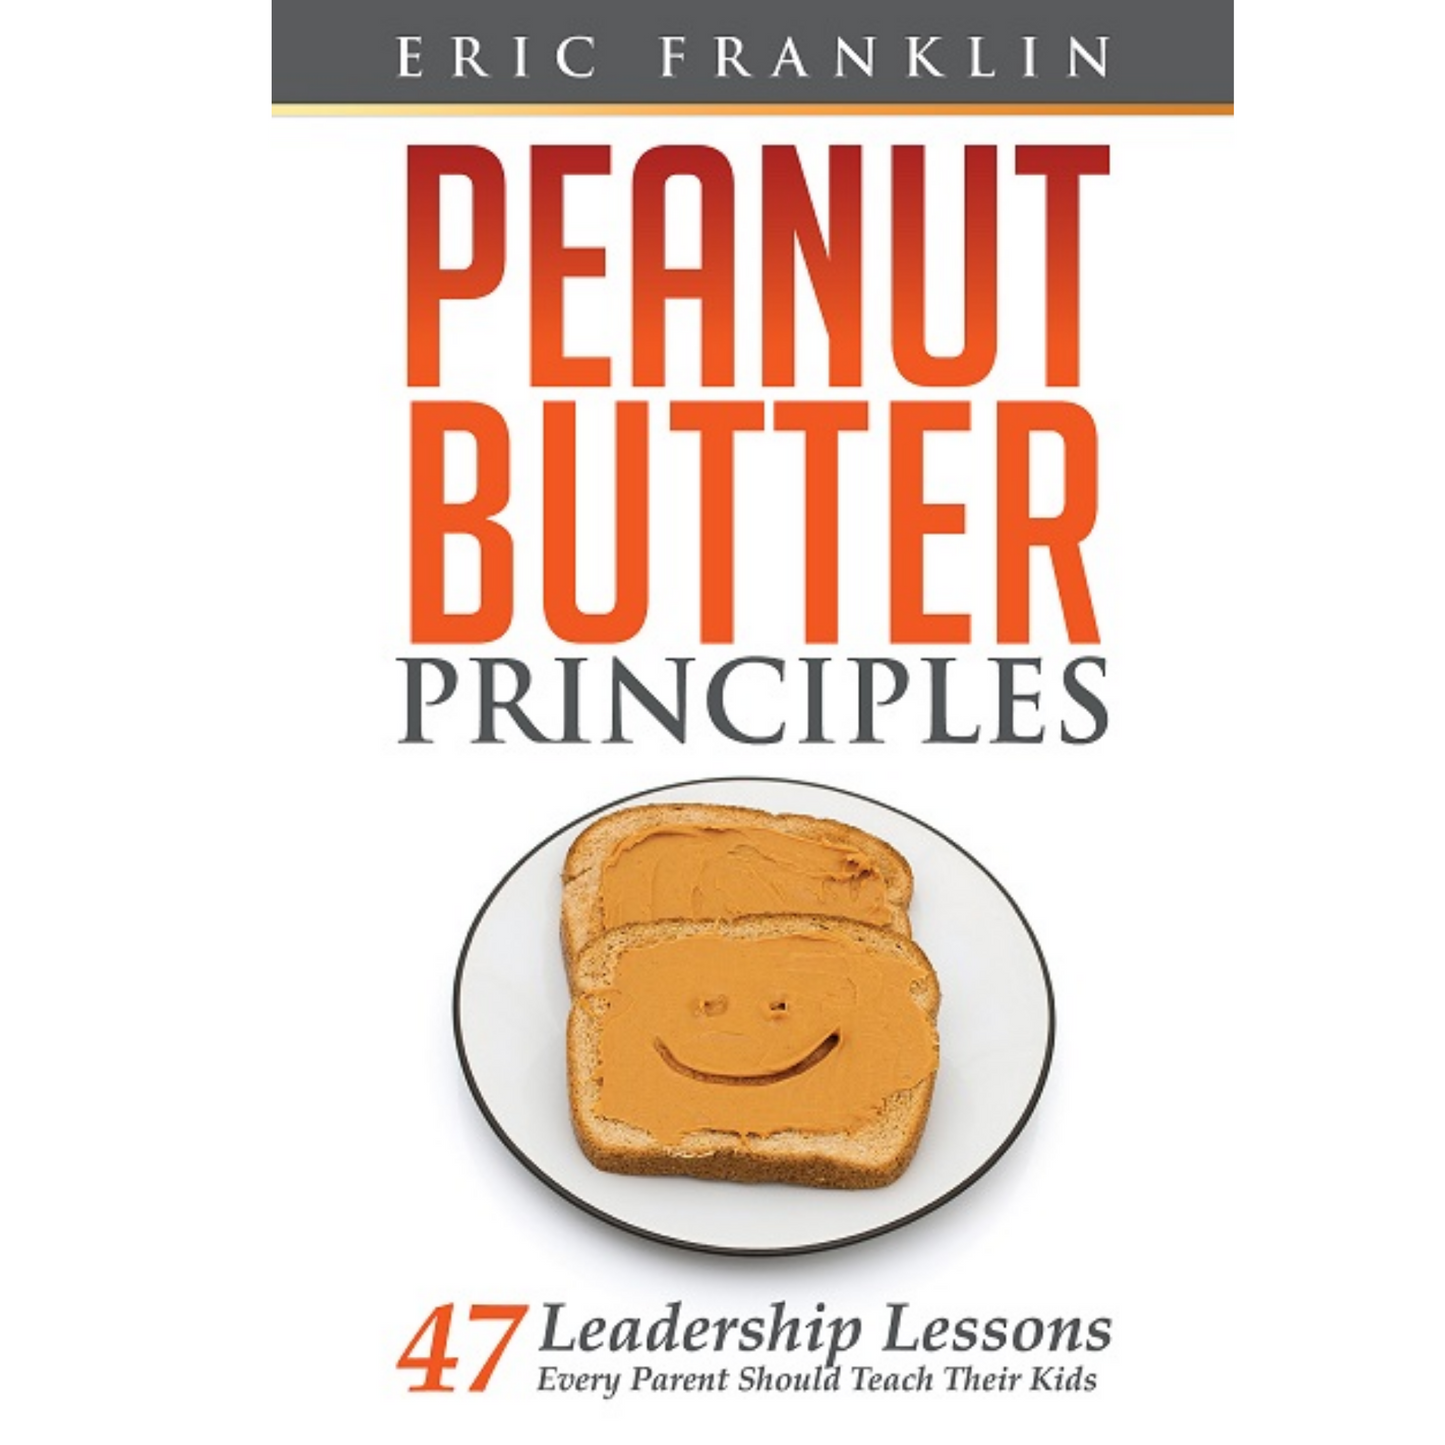 Peanut Butter Principles: 47 Leadership Lessons Every Parent Should Teach Their Kids